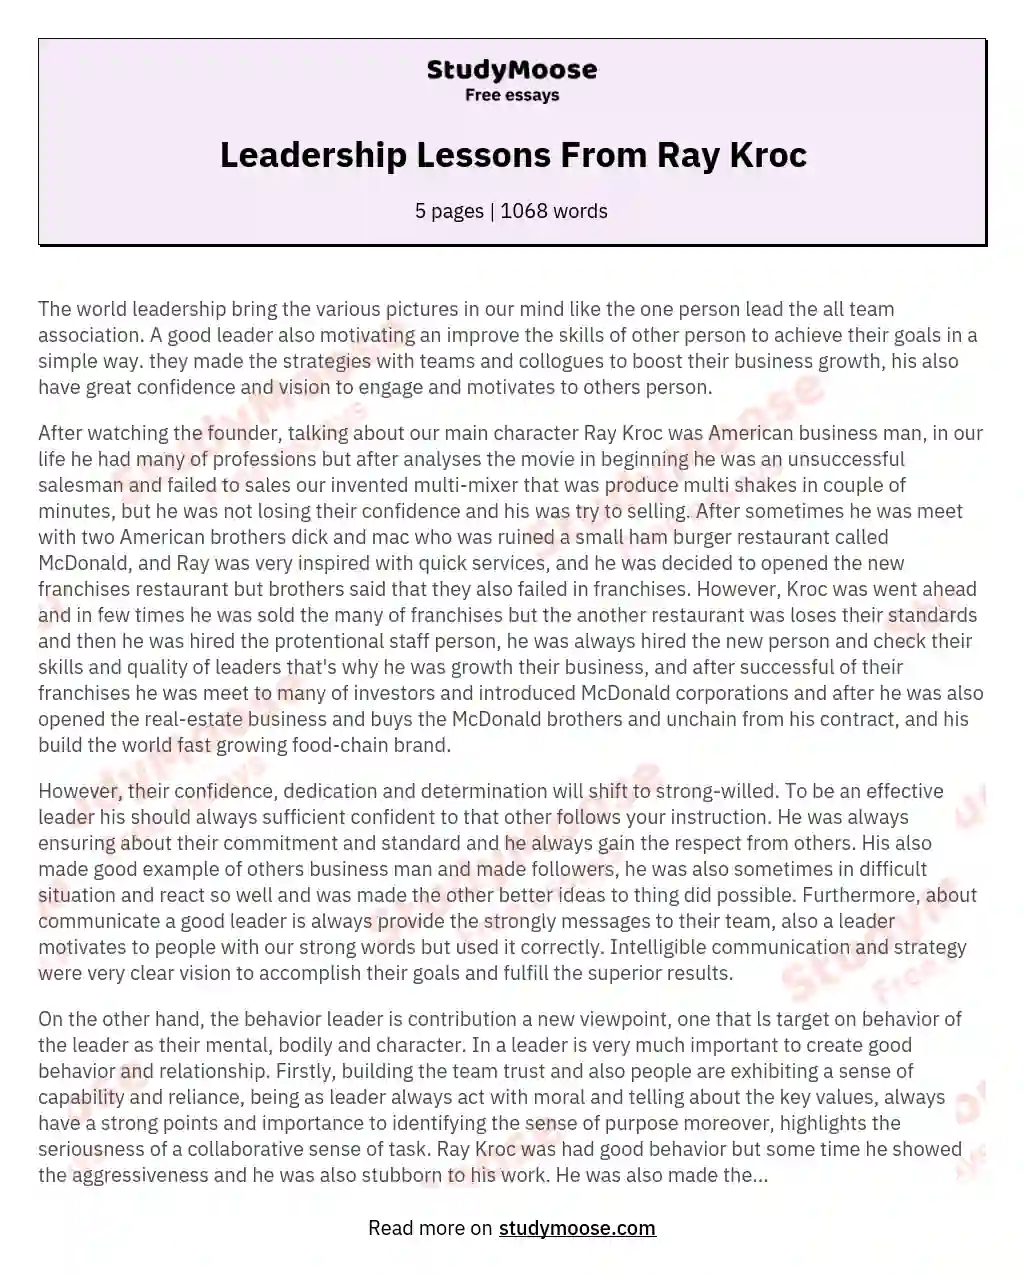 Leadership Lessons From Ray Kroc essay